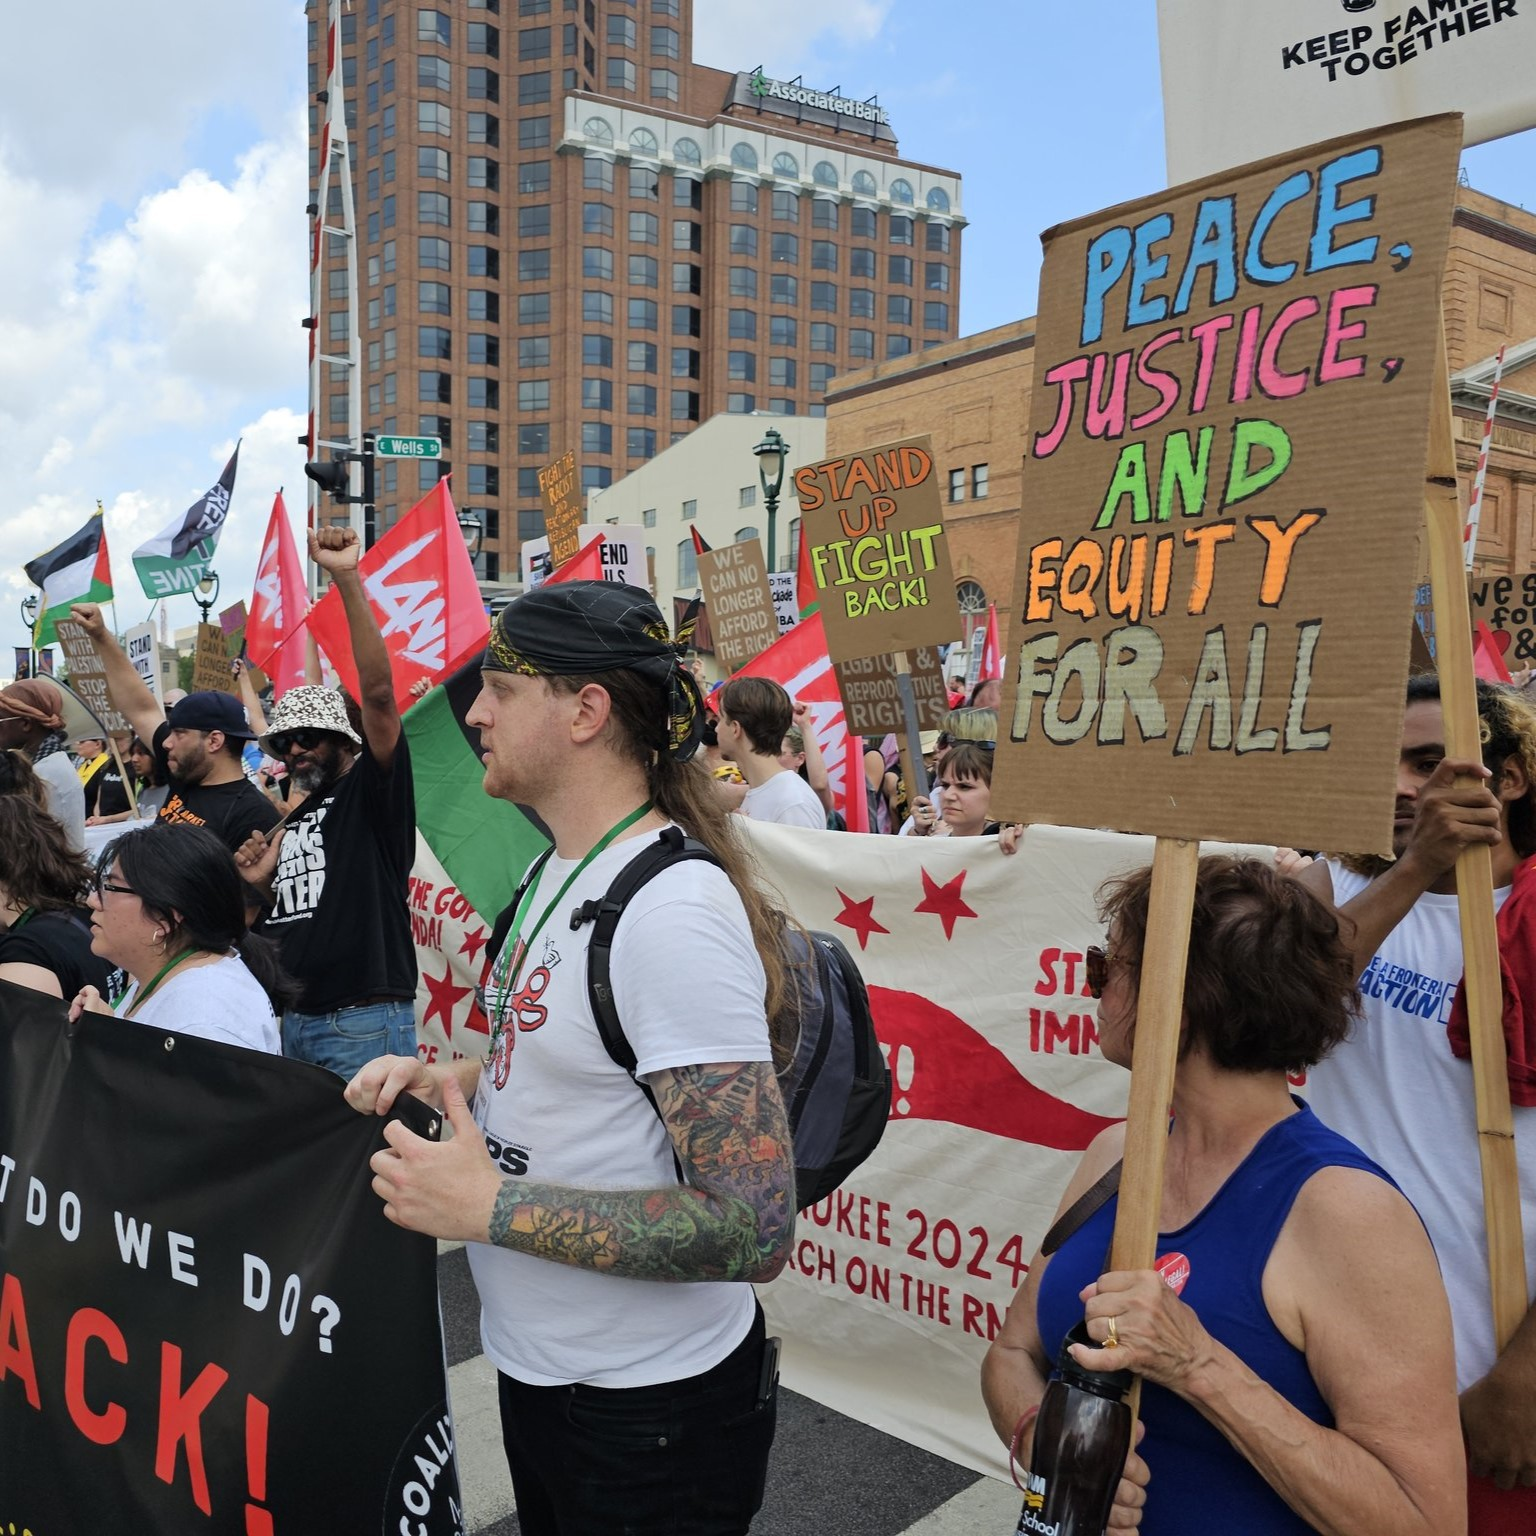 Nearly 1,000 protesters march near Republican National Convention